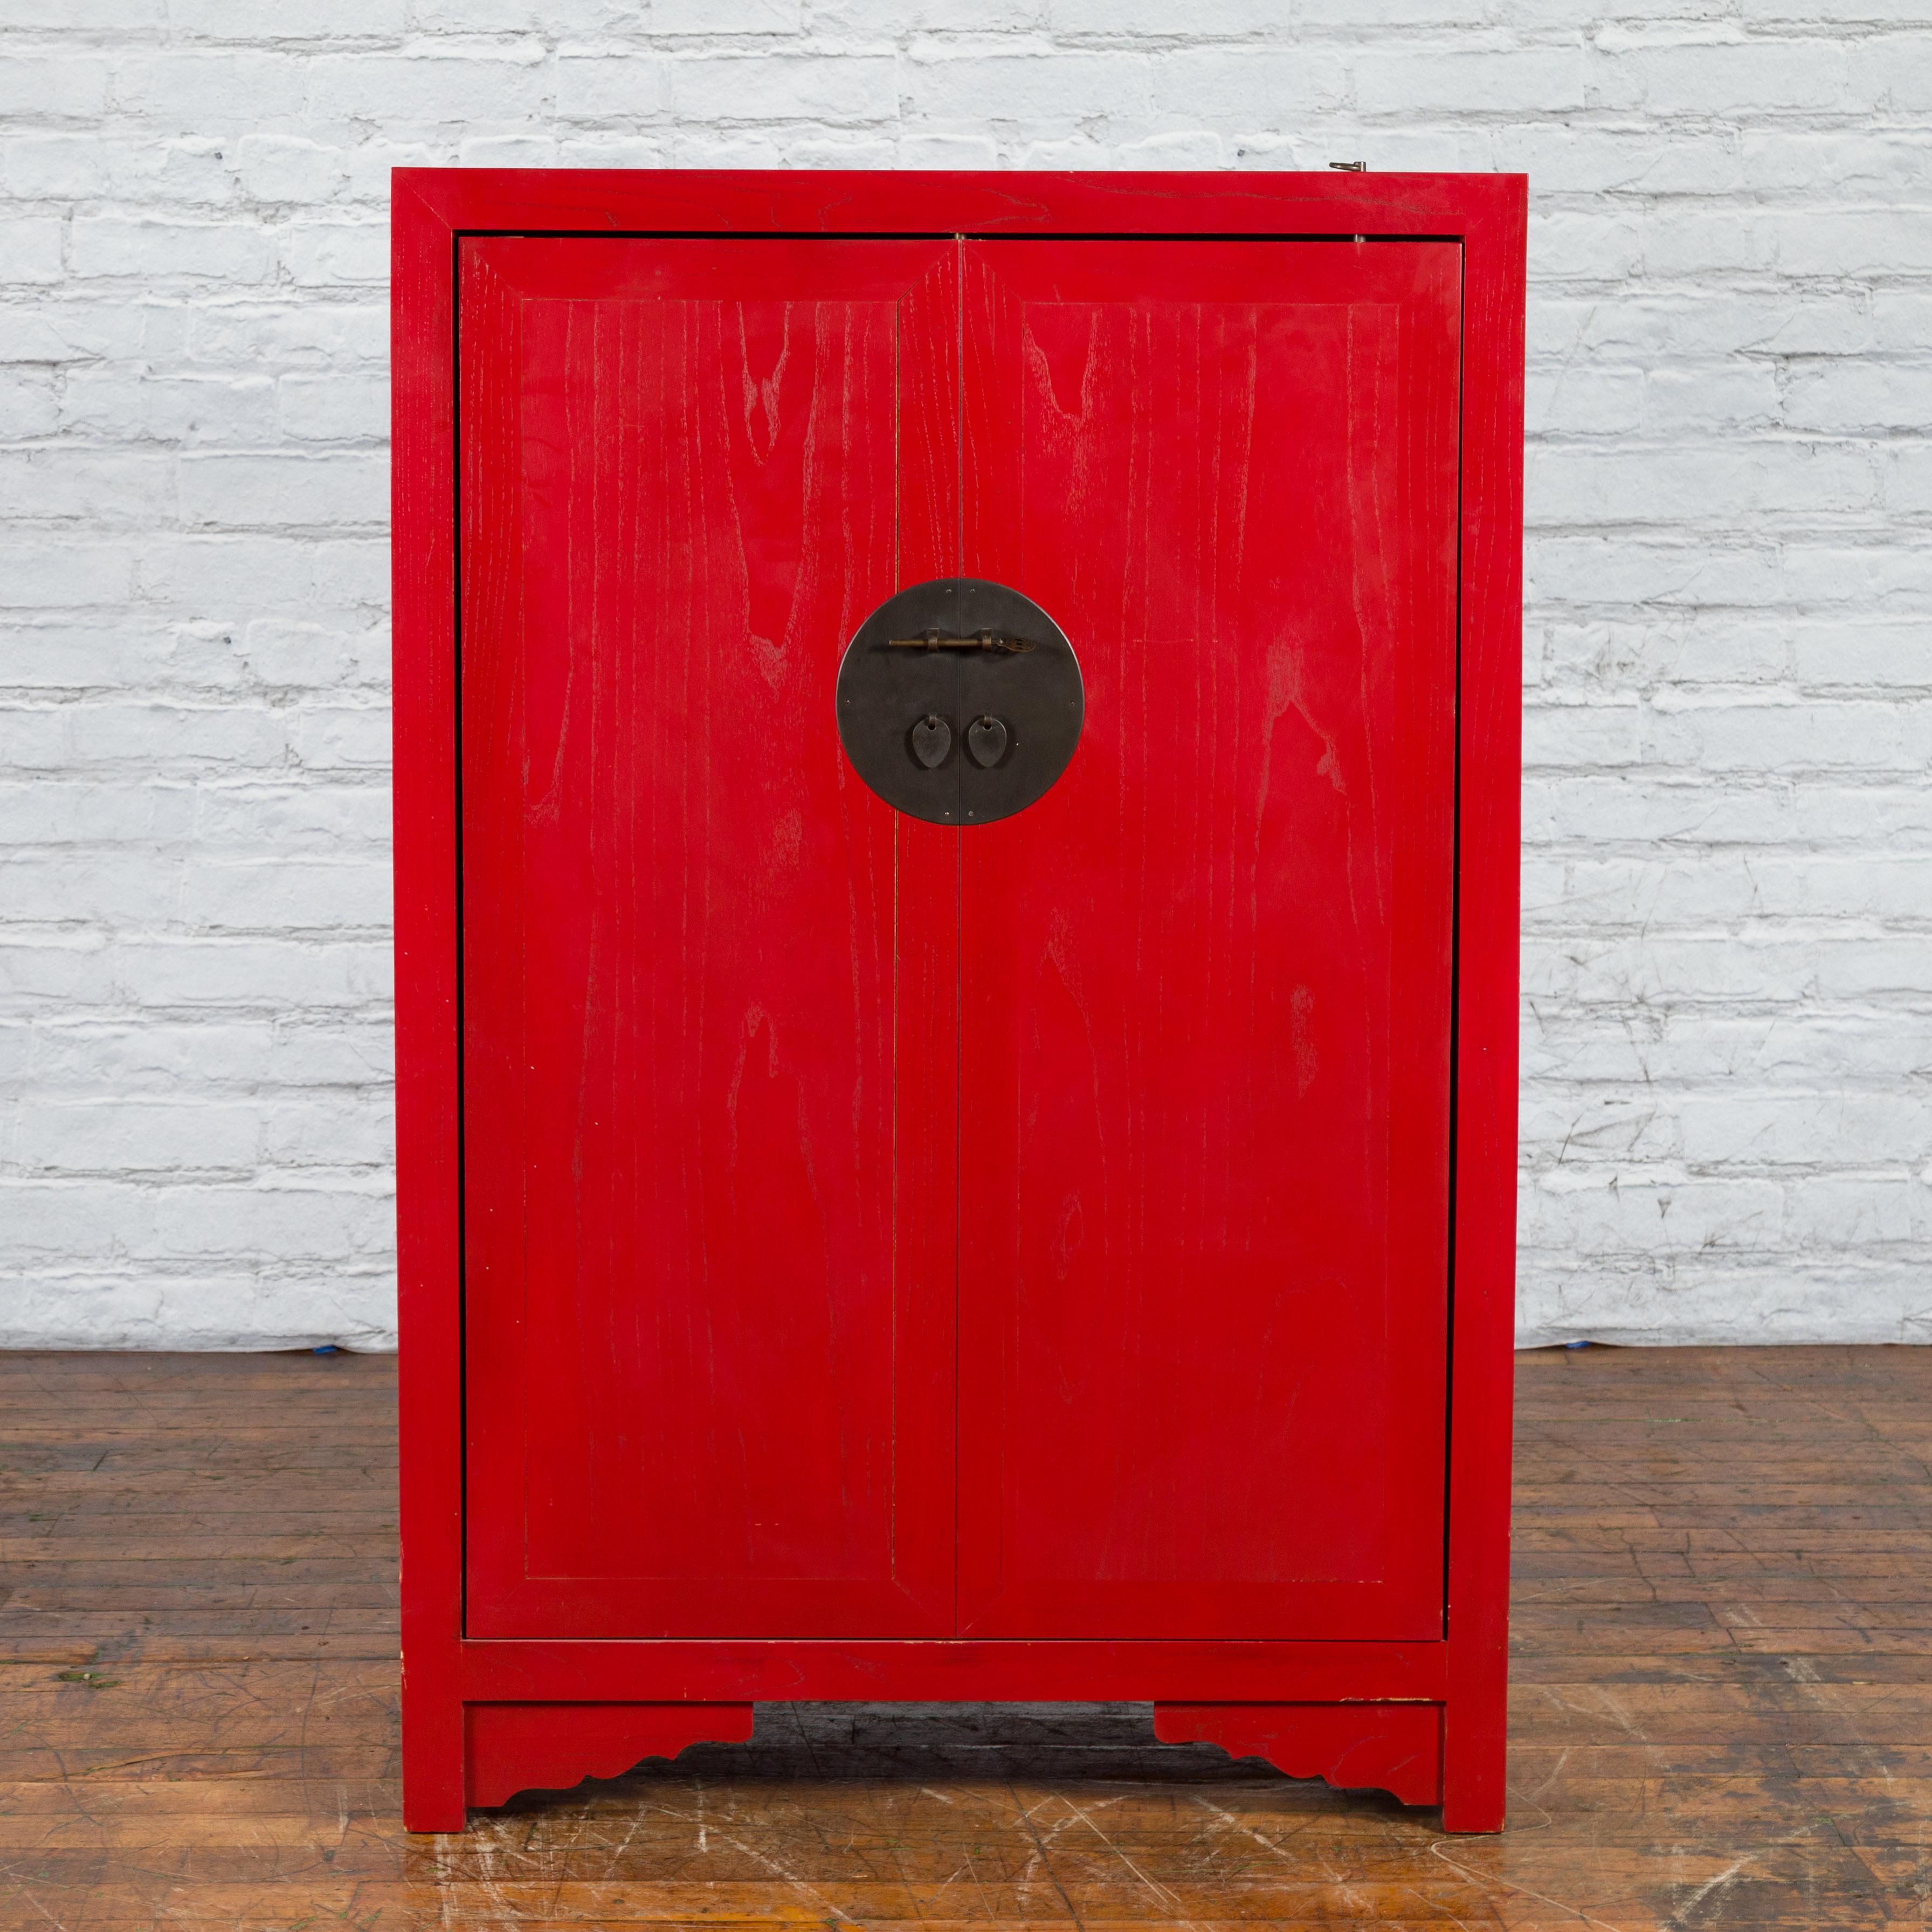 An American Chinese style red lacquered liquor cabinet from the 21st century, with revolving hidden wine rack. Made in the USA, this contemporary liquor cabinet was designed in an antique Chinese style. The cabinet feature a linear silhouette